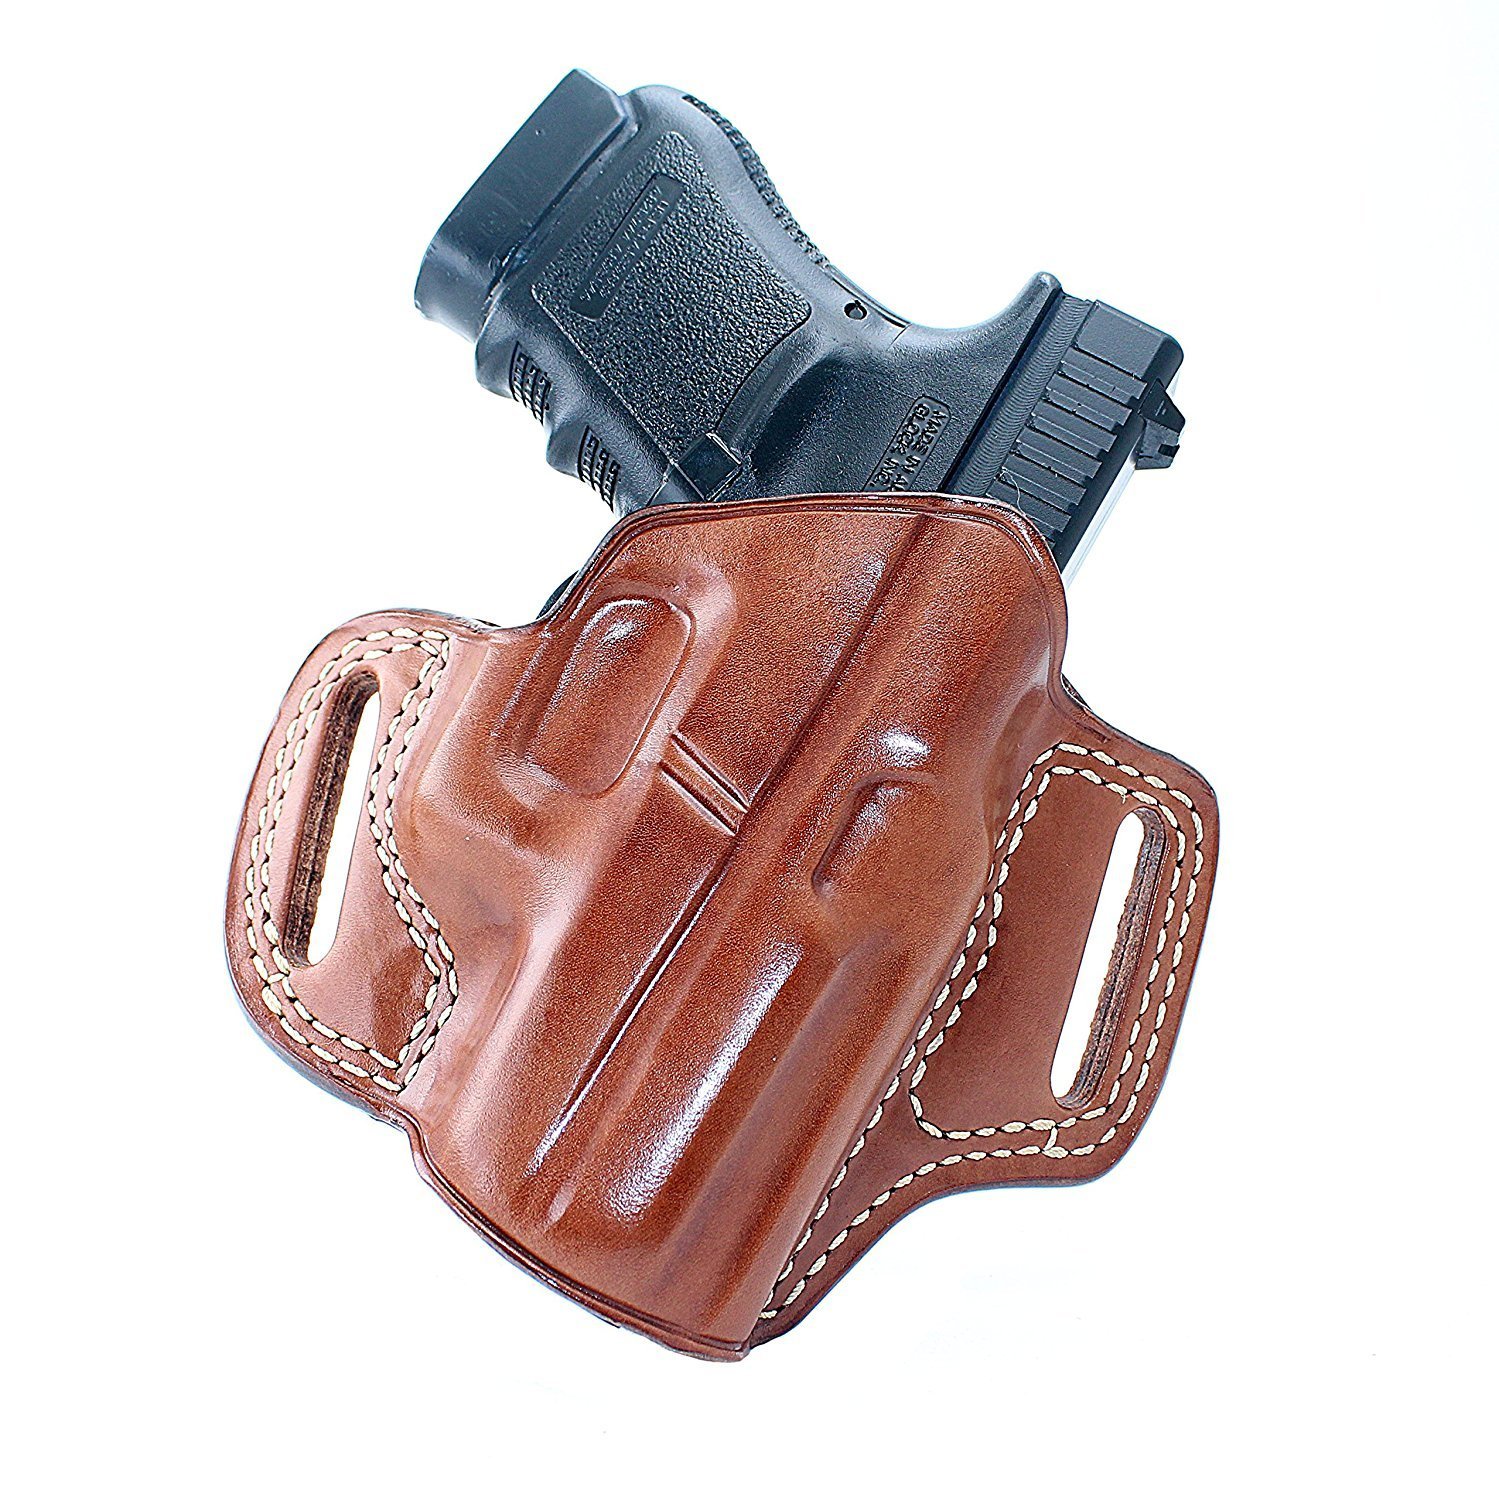 Leather Pancake Holster with Fit, Diamondback DB9 9mm 3''BBL Without Laser#1099# - $55.99